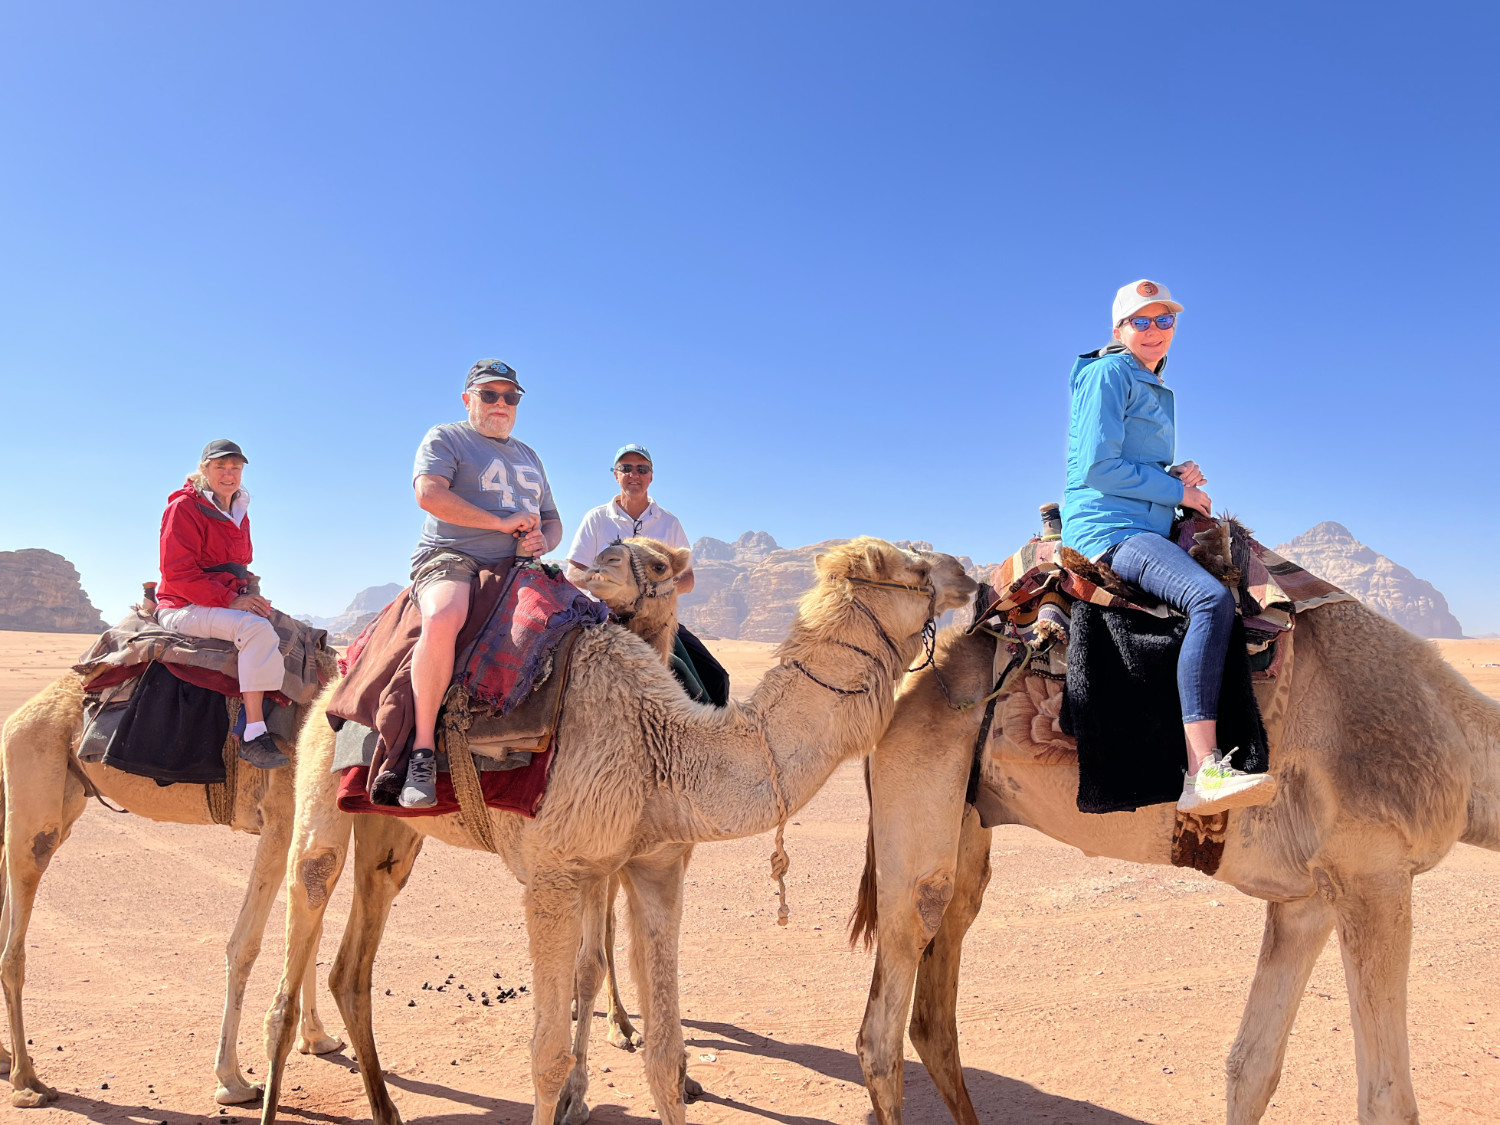 All 4 on camels